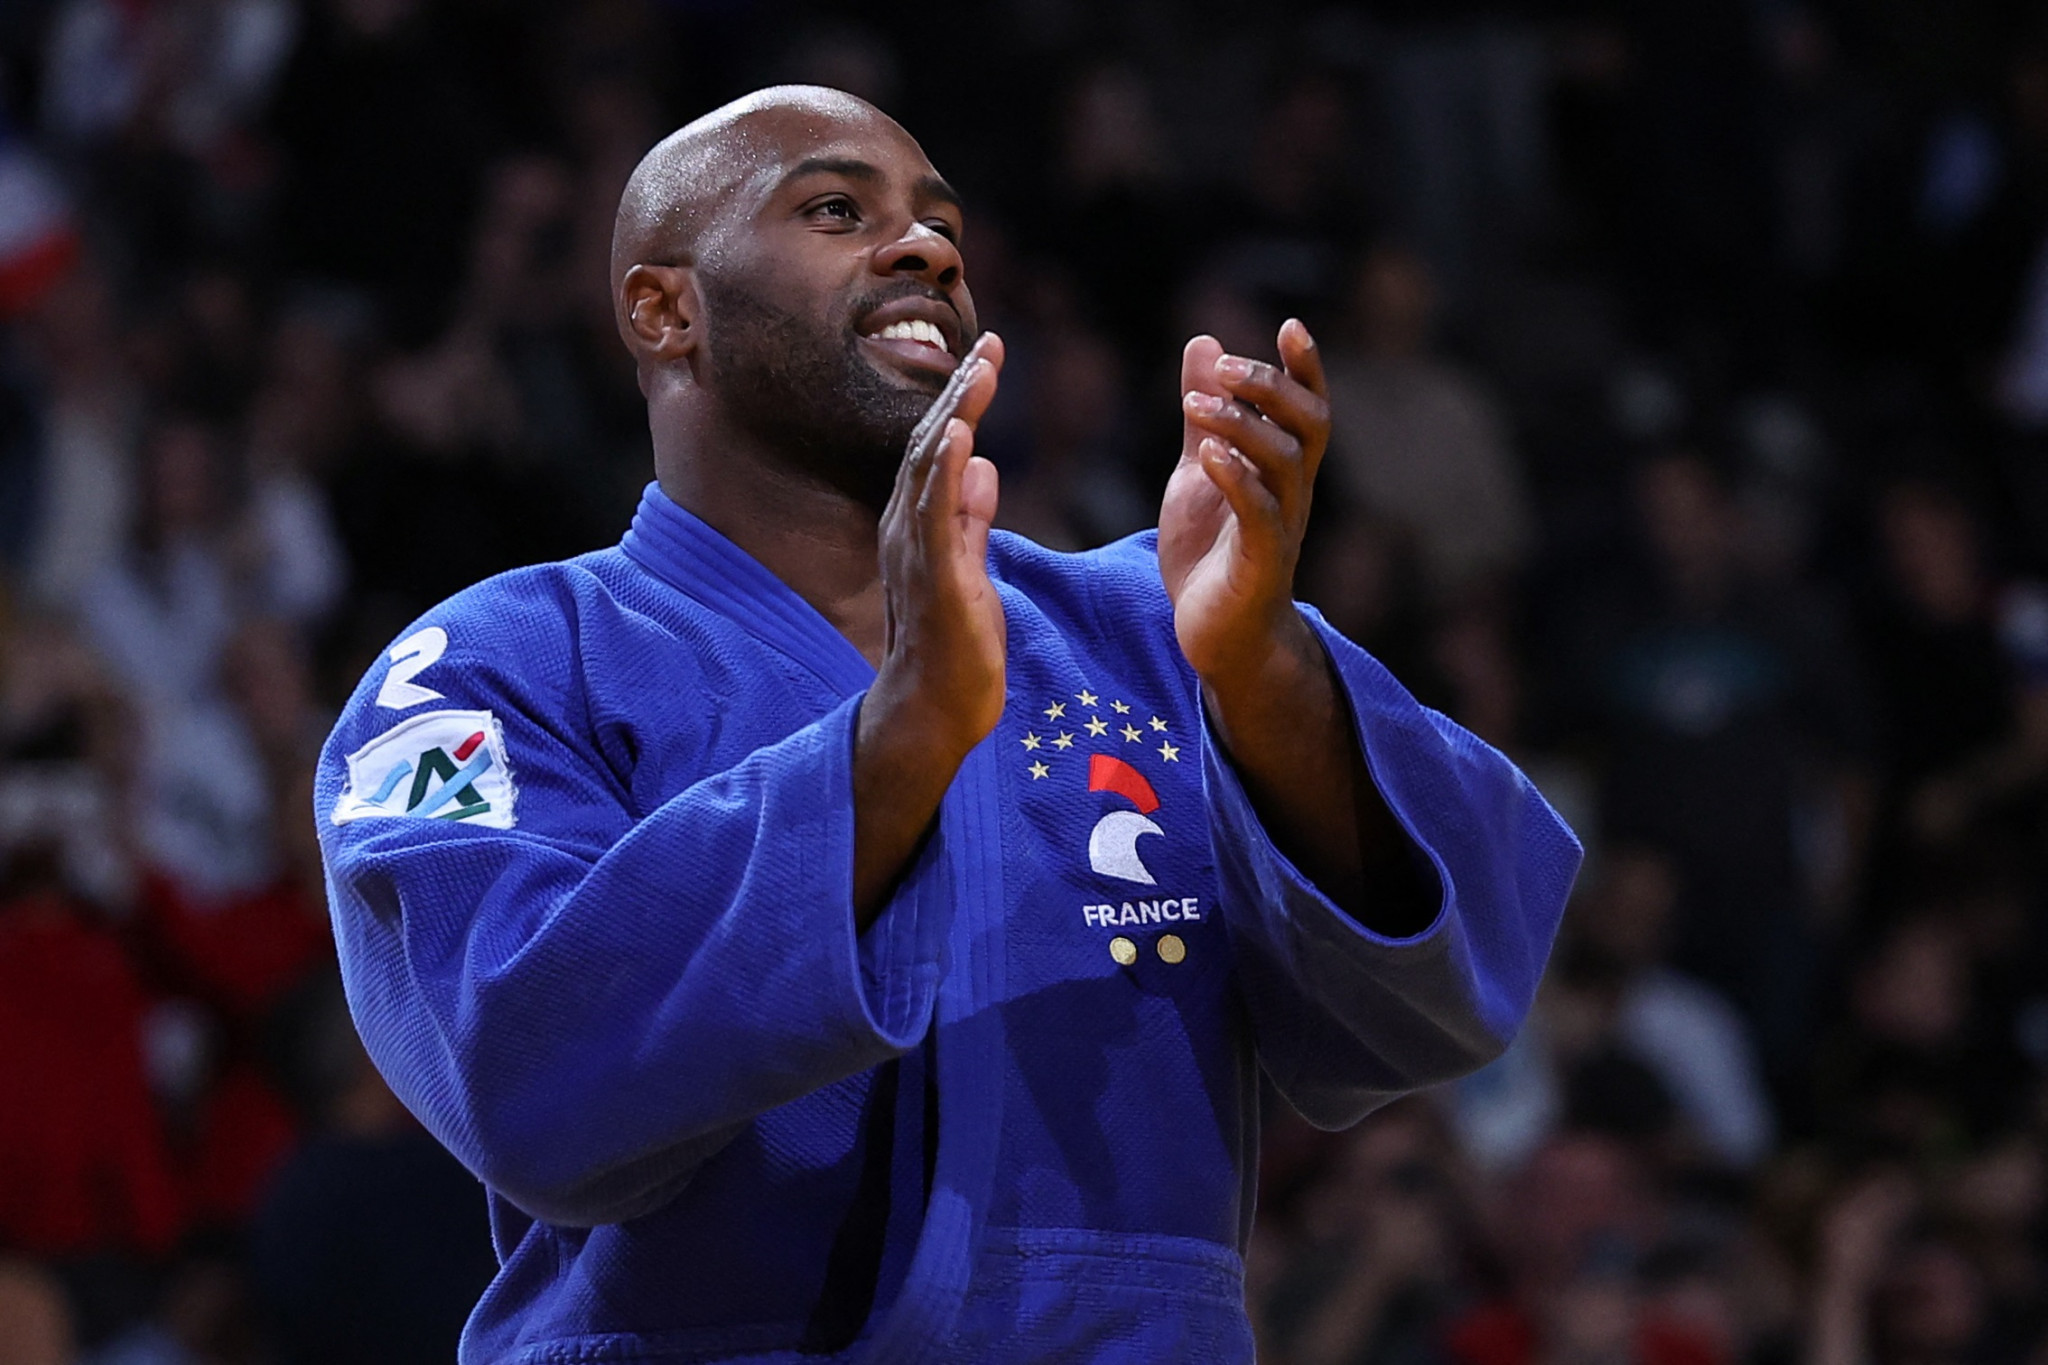 Three-time Olympic champion Teddy Riner is back at the World Judo Championships for the first time since 2017 ©Getty Images